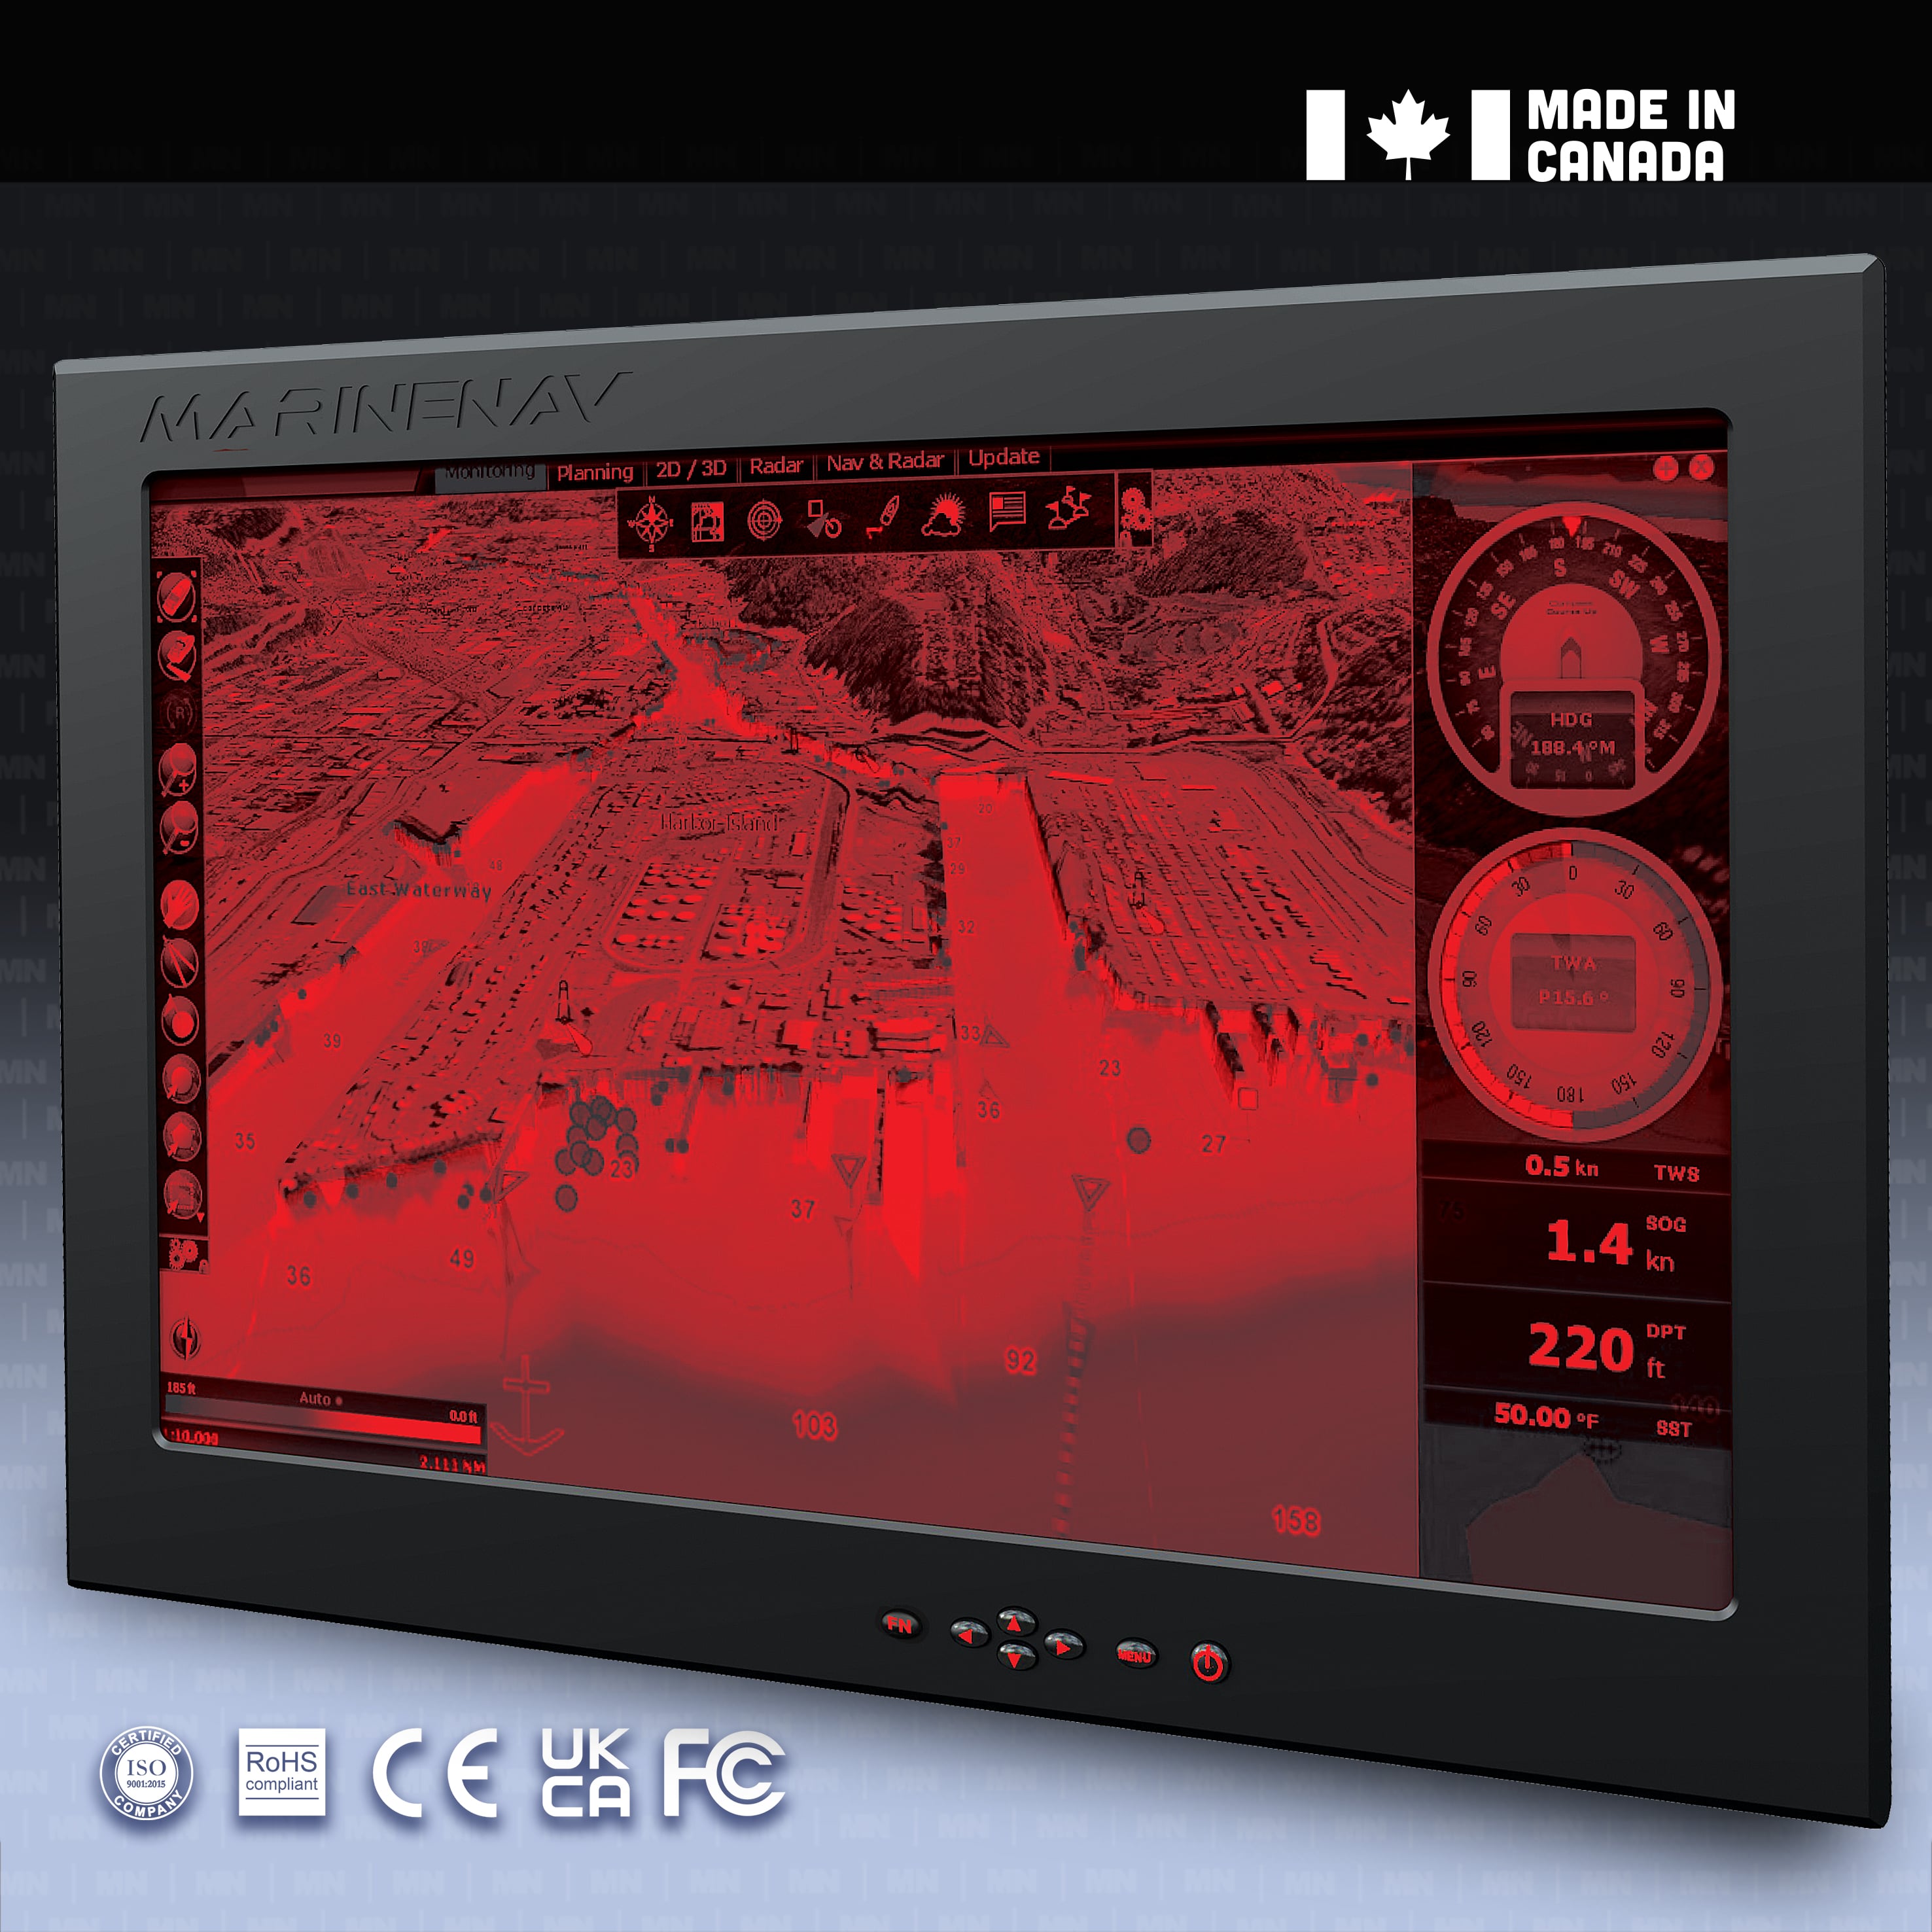 Mariner series marine-grade displays with one touch night-mode viewing option